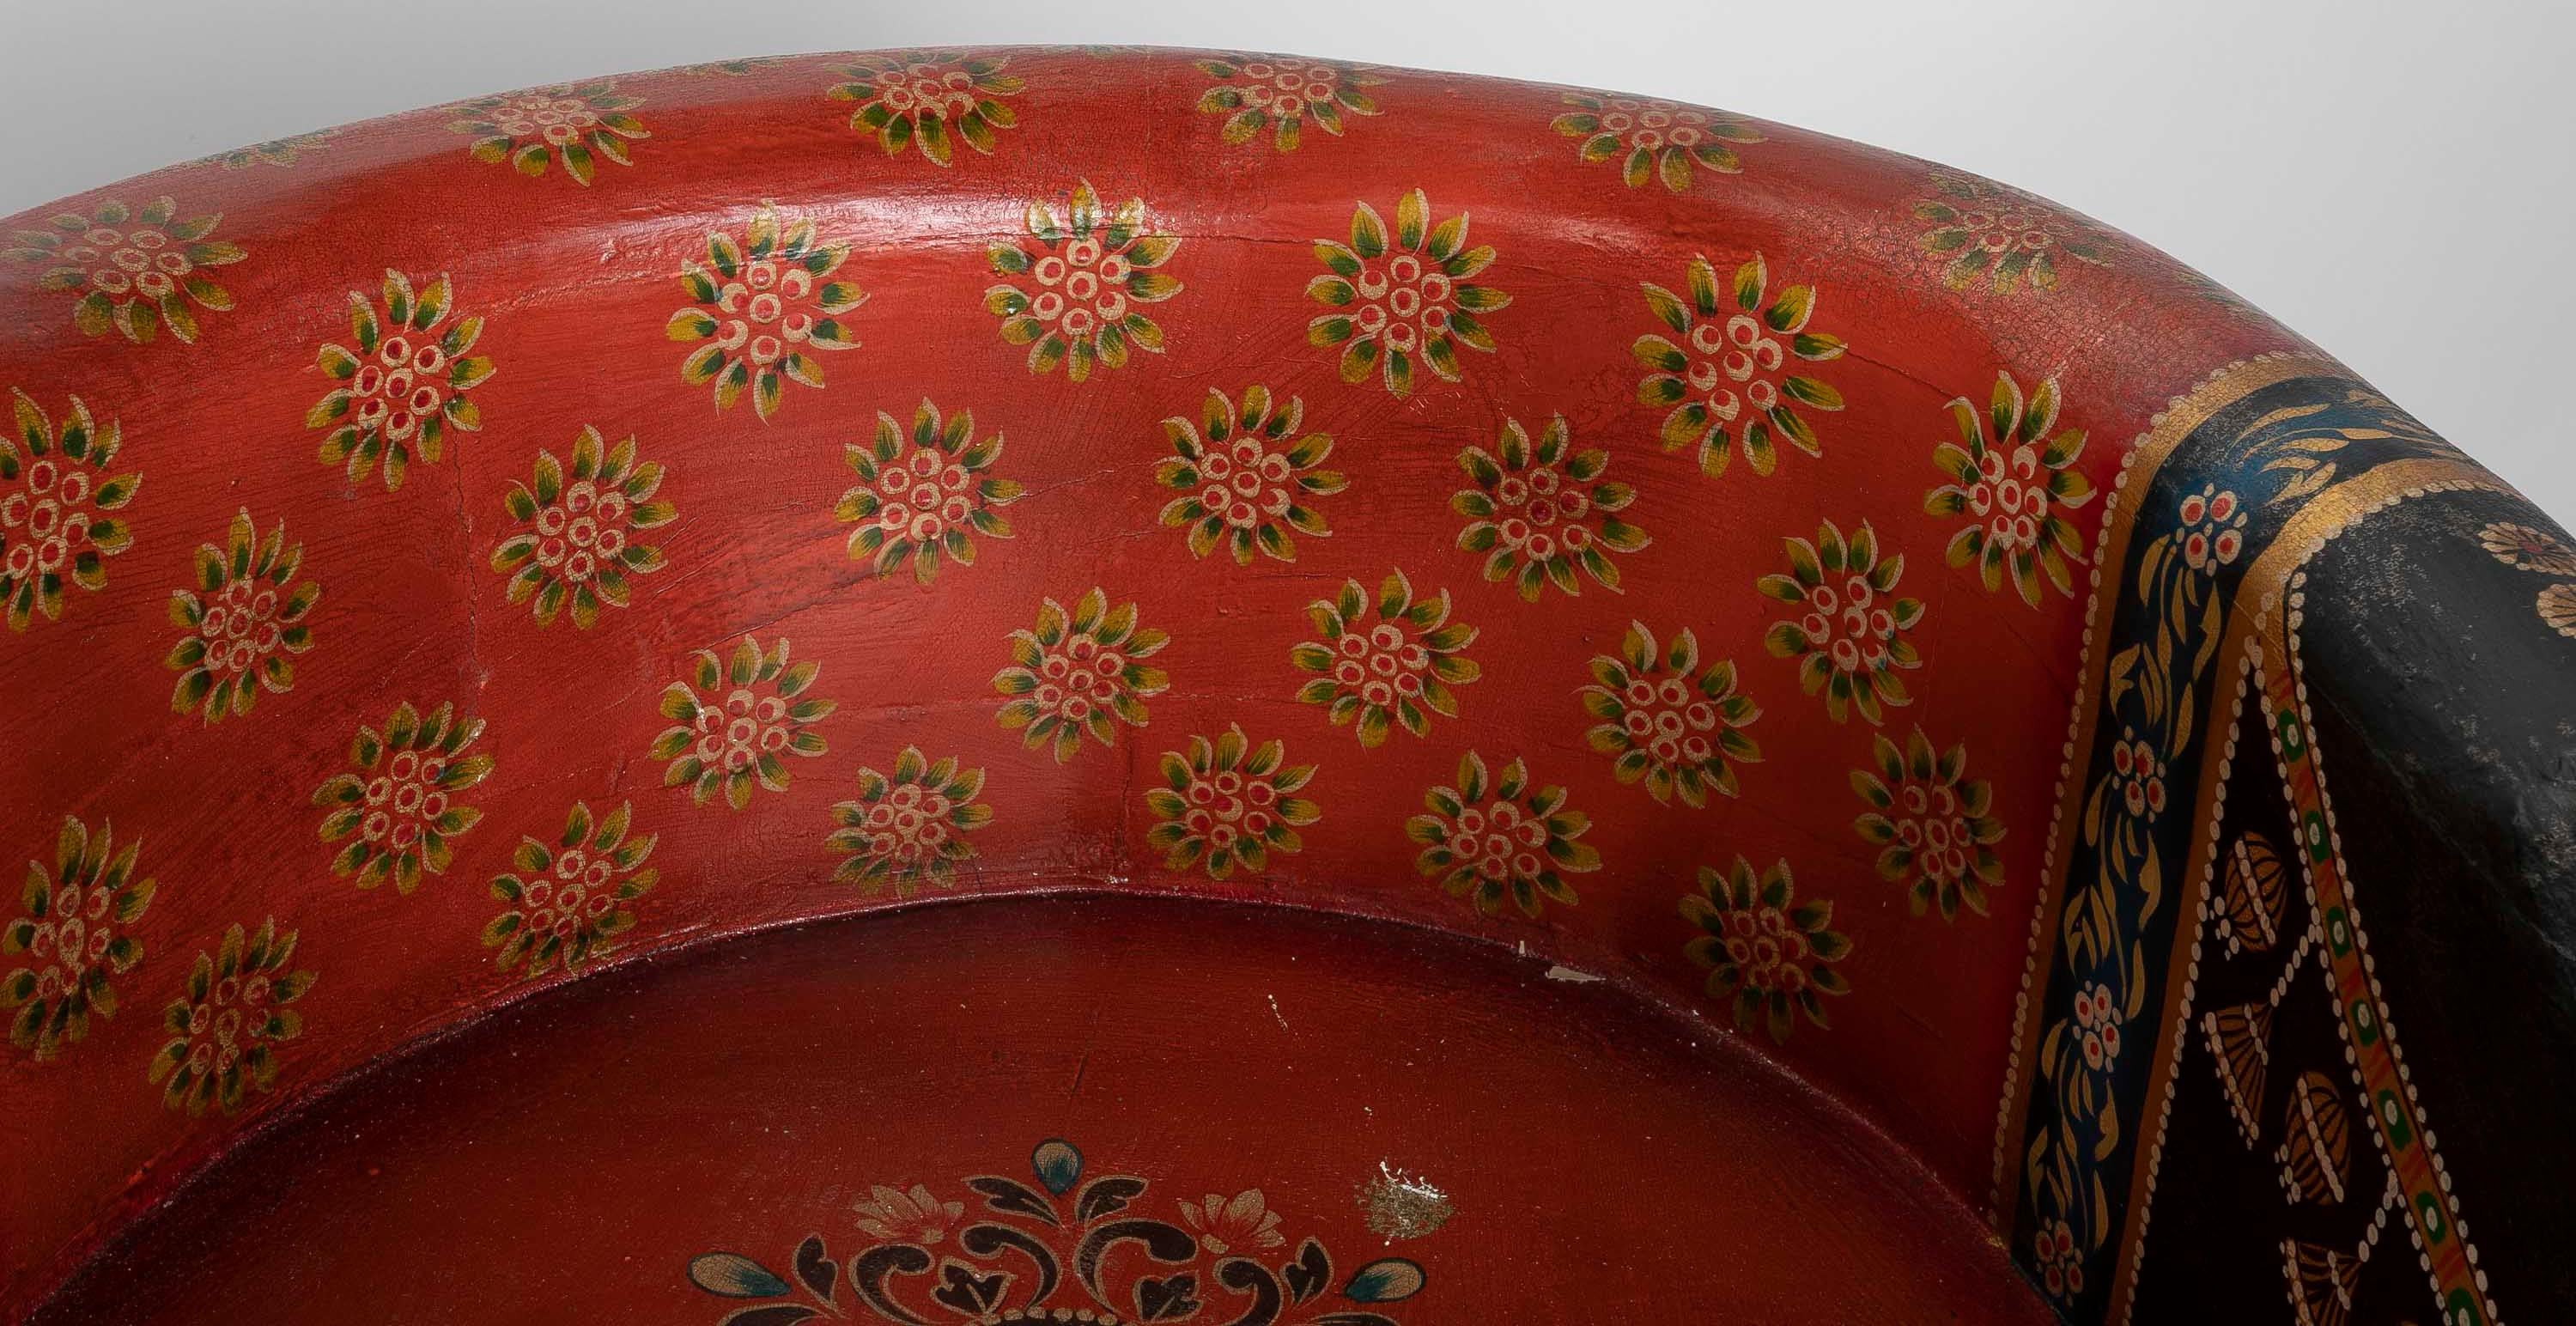 Hand-Carved and Hand-Painted Wooden Elephant Armchair For Sale 8